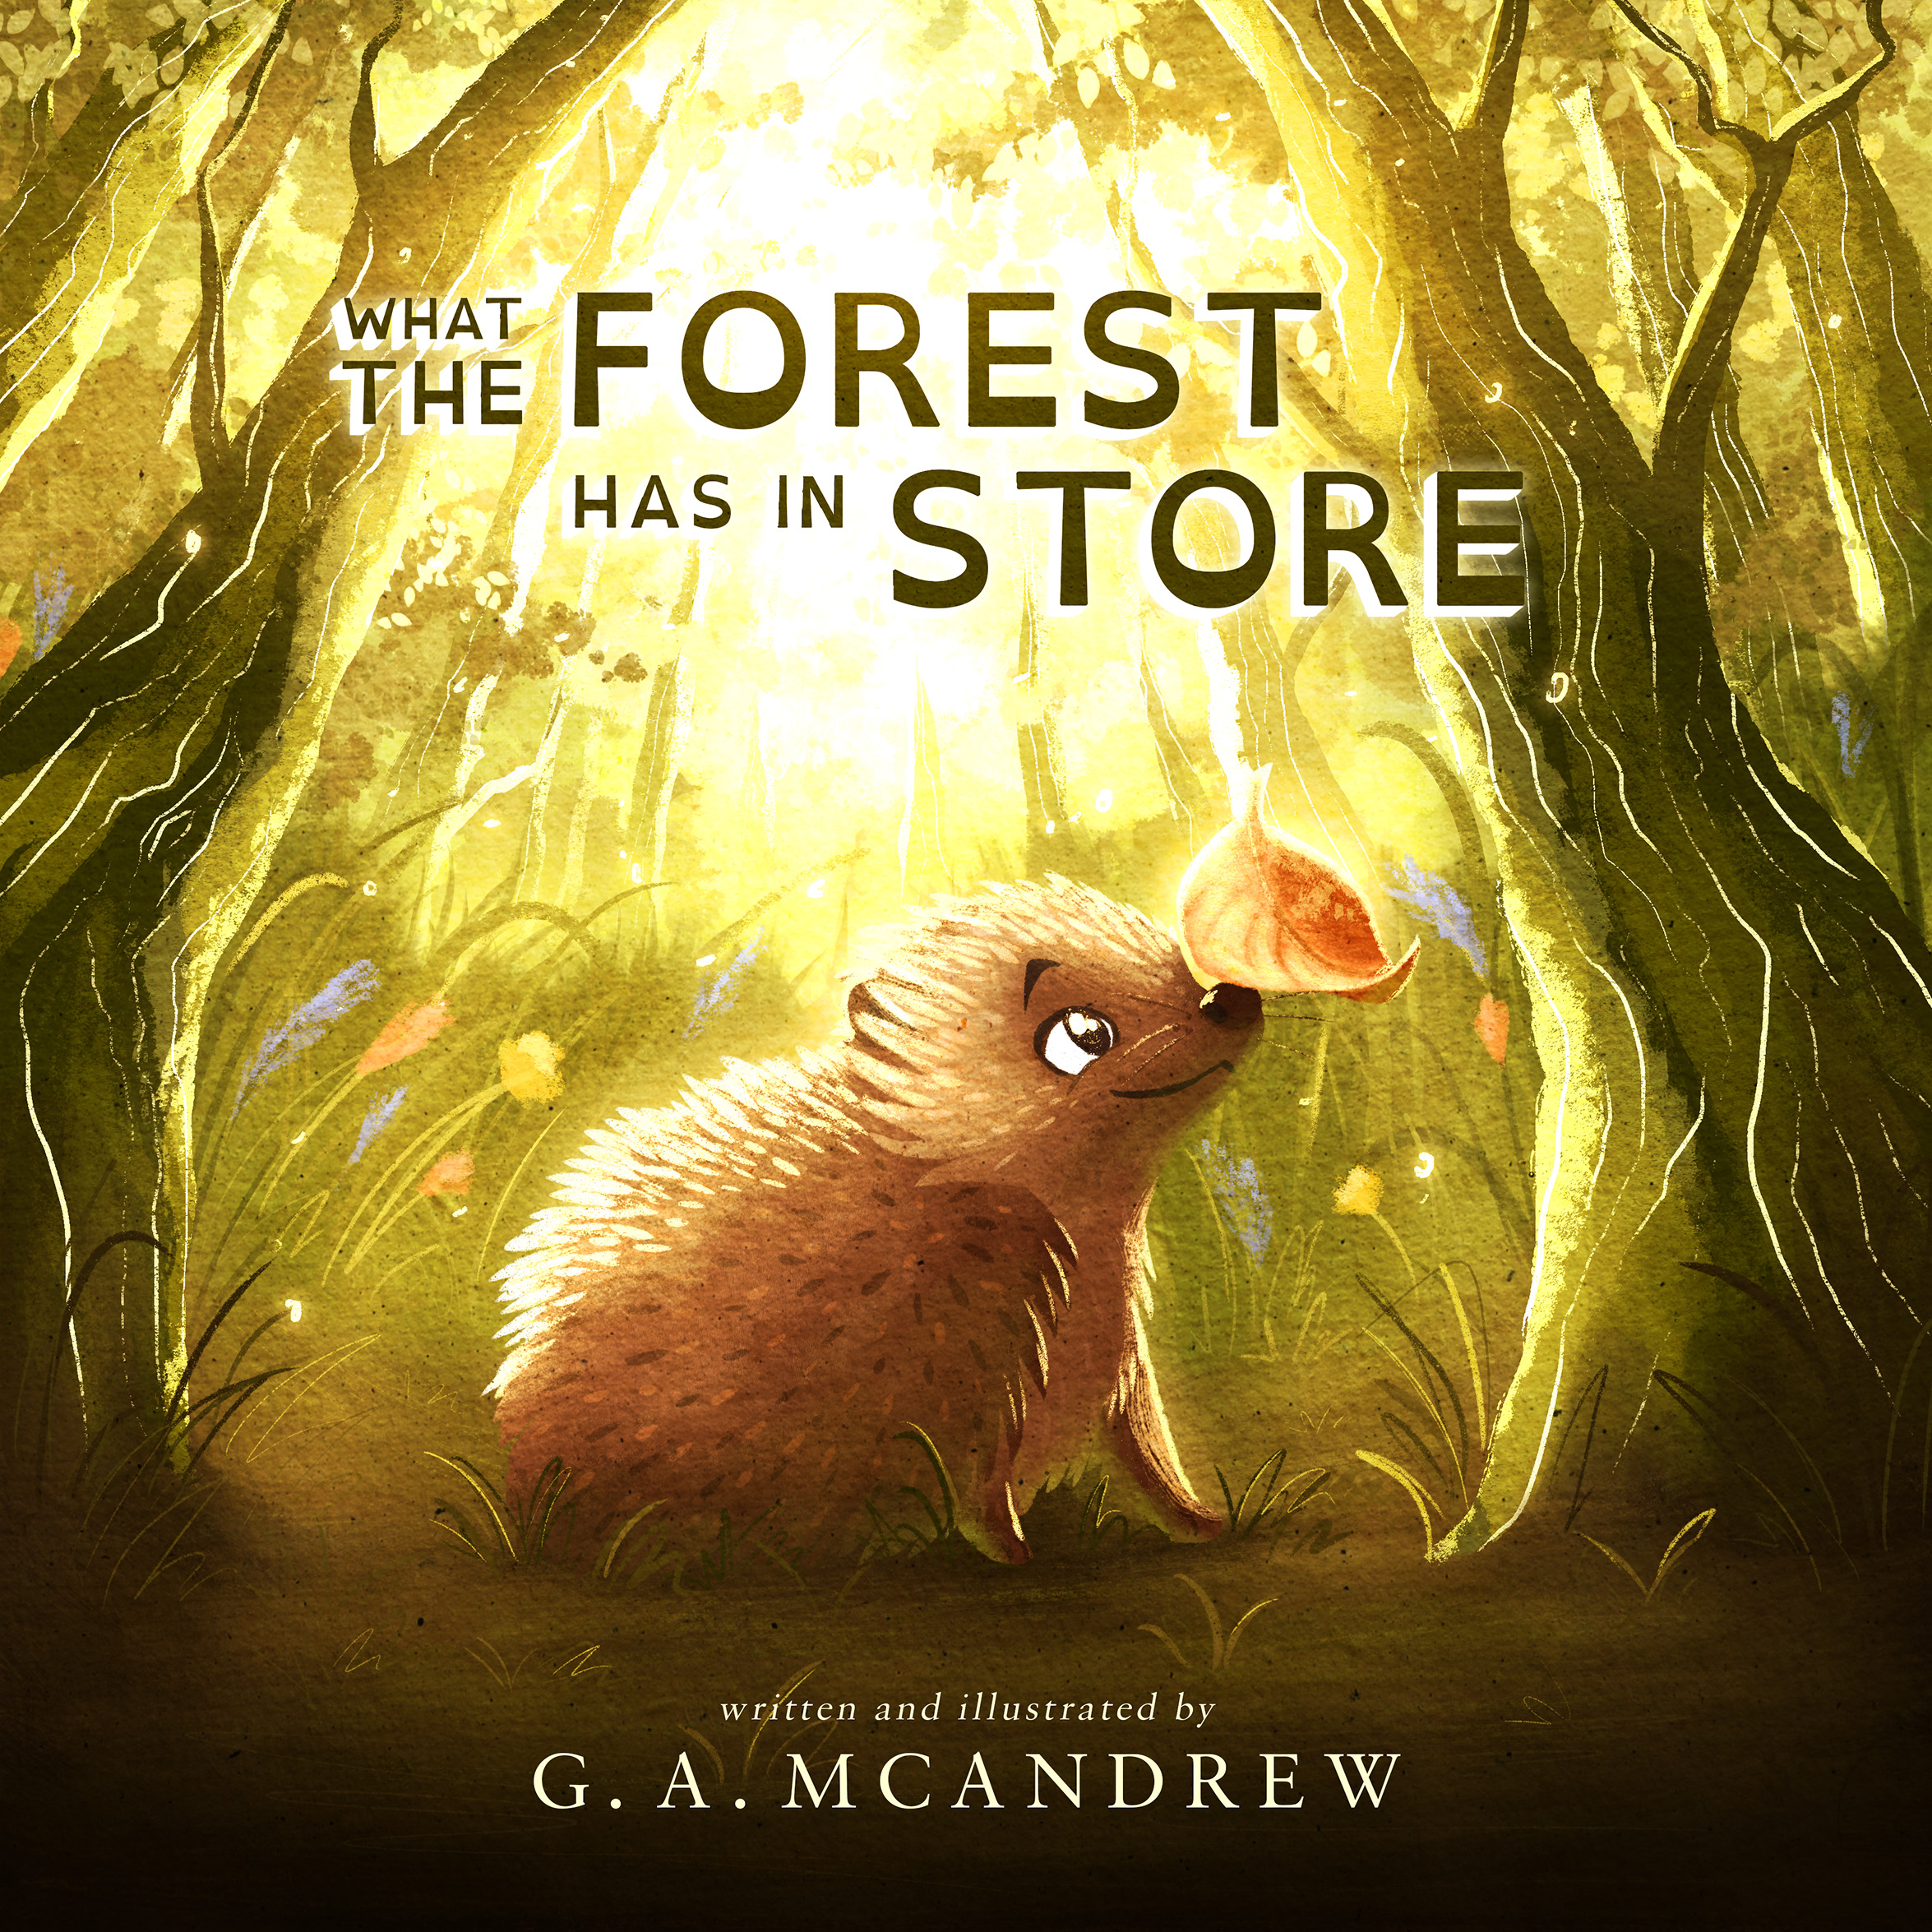 What the Forest Has in Store Front Cover by G. A. McAndrew, depicting a small hedgehog with a leaf on his nose in a colourful forest.